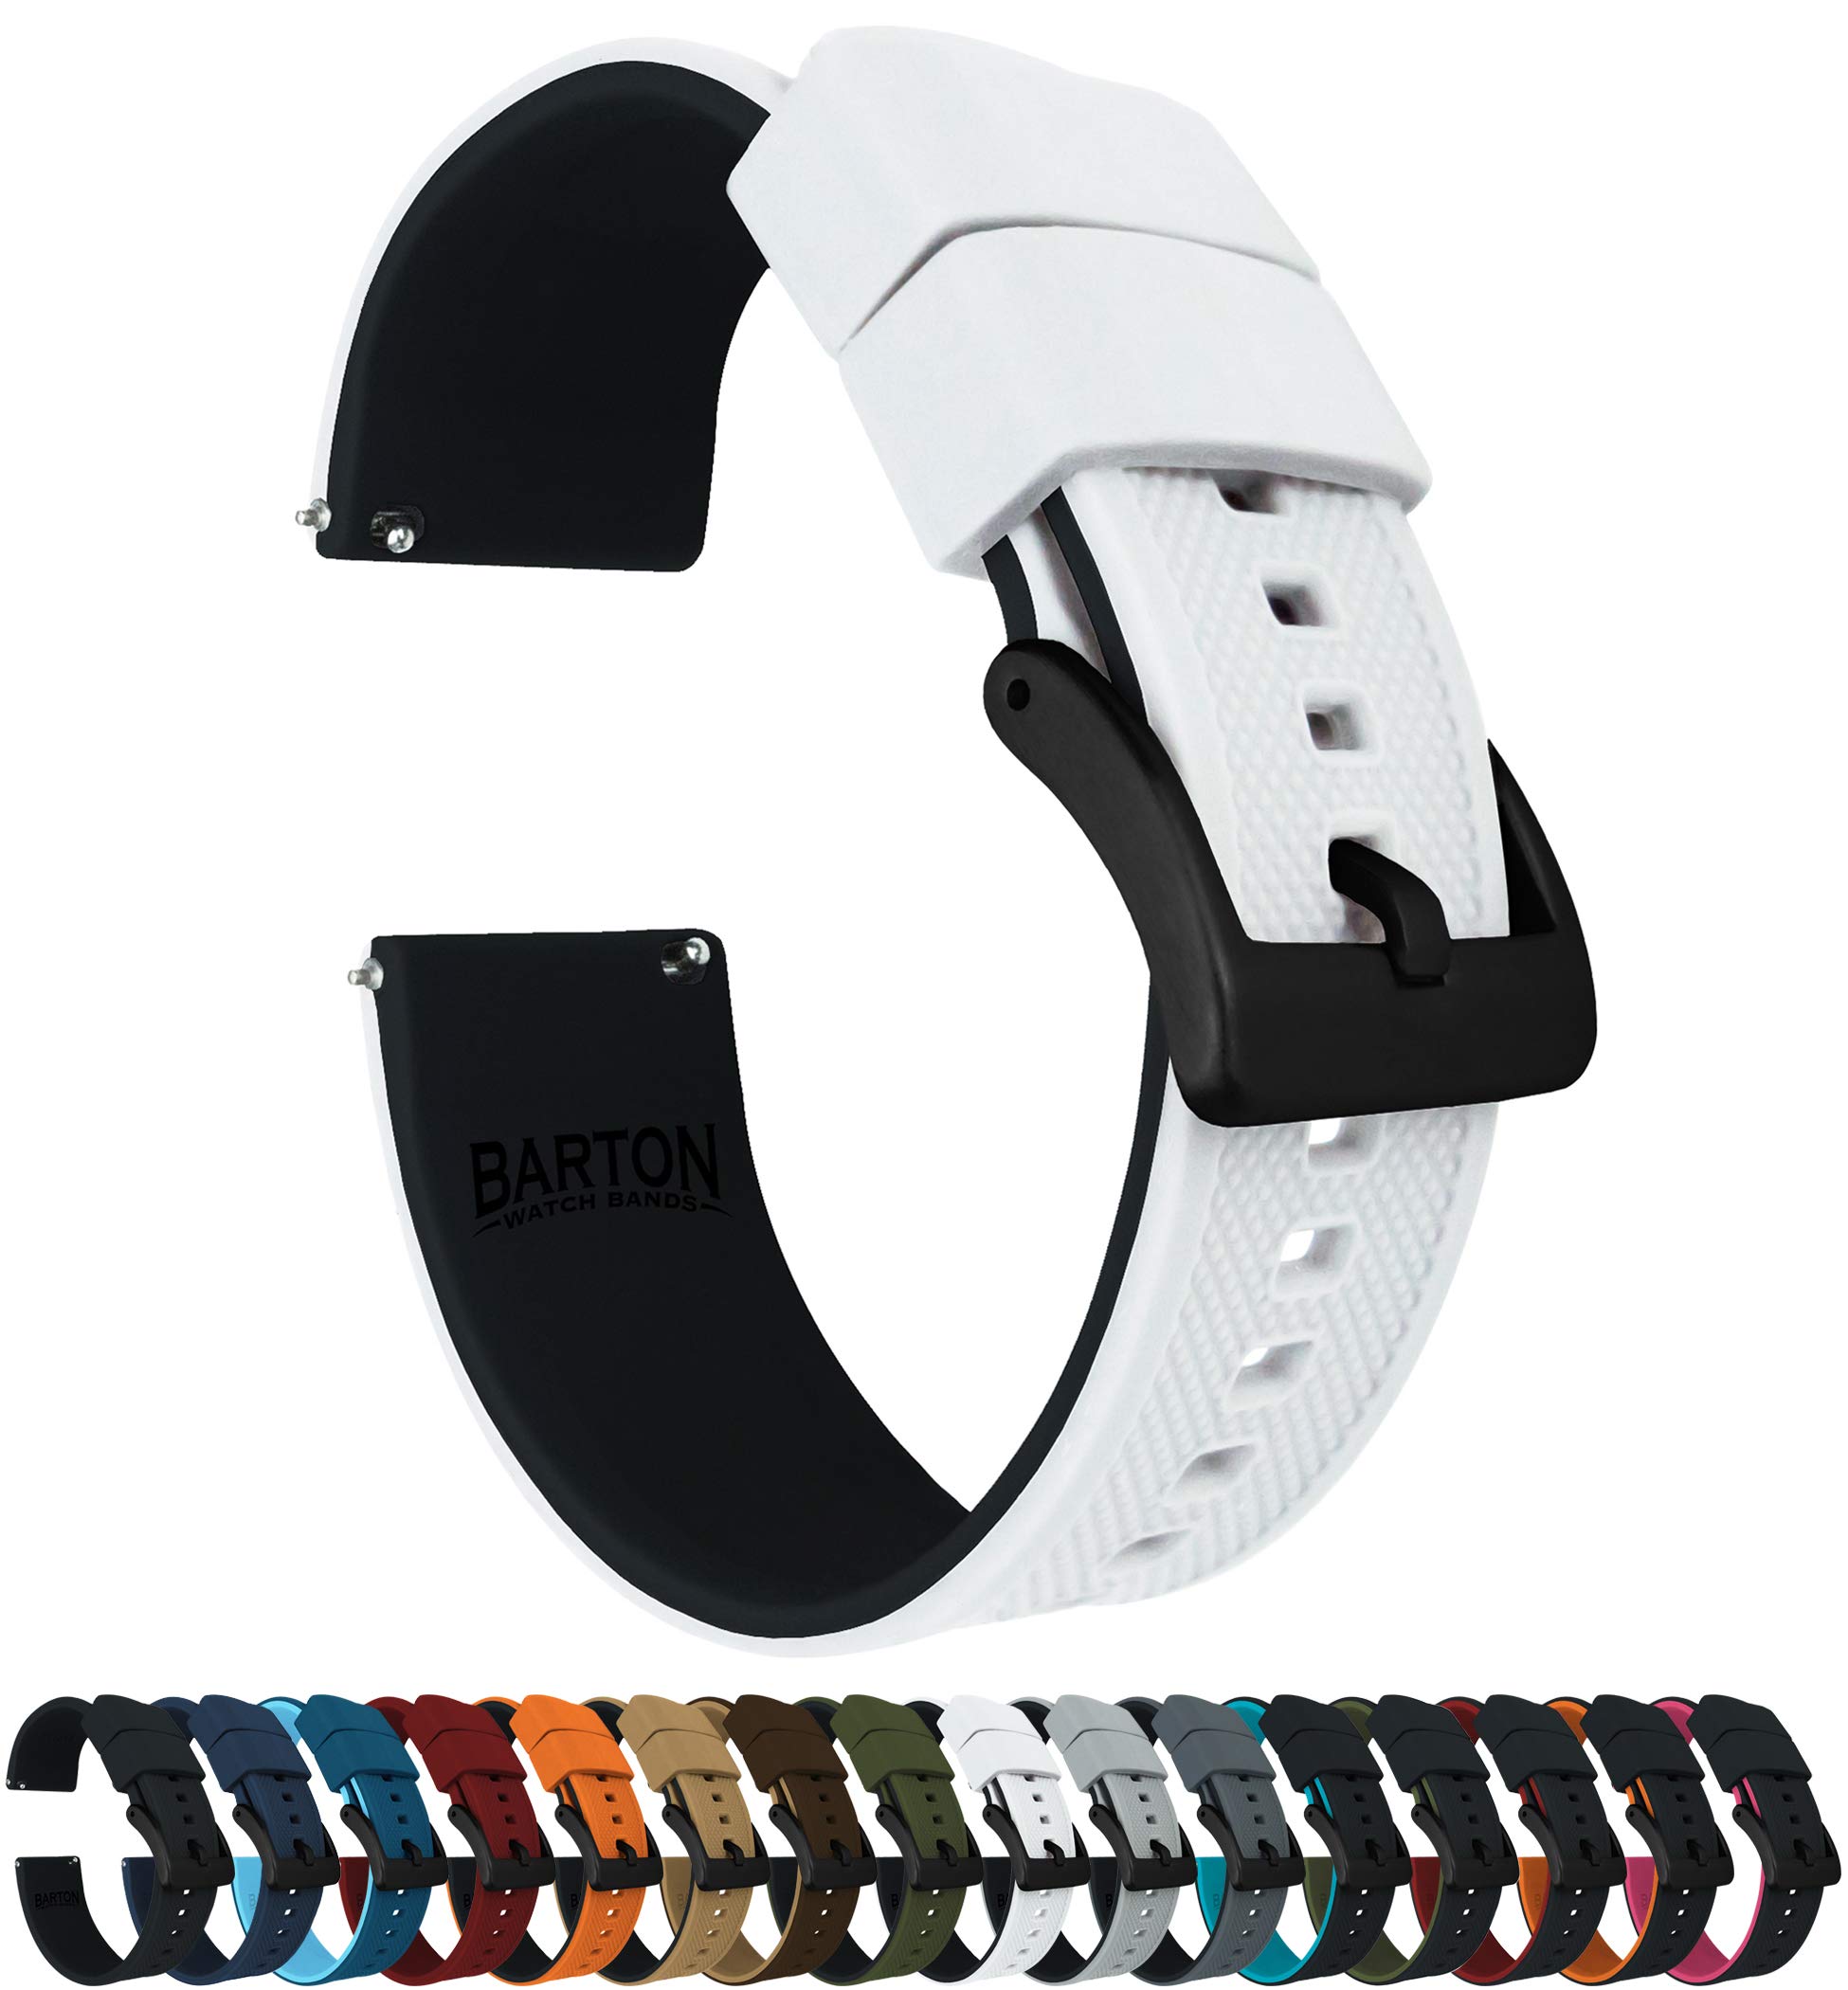 BARTON Elite Silicone Watch Bands - Quick Release - Choose Strap Color & Buckle Color (Stainless Steel, Black PVD or Gunmetal Grey) - 18mm, 20mm, 22mm & 24mm Watch Straps